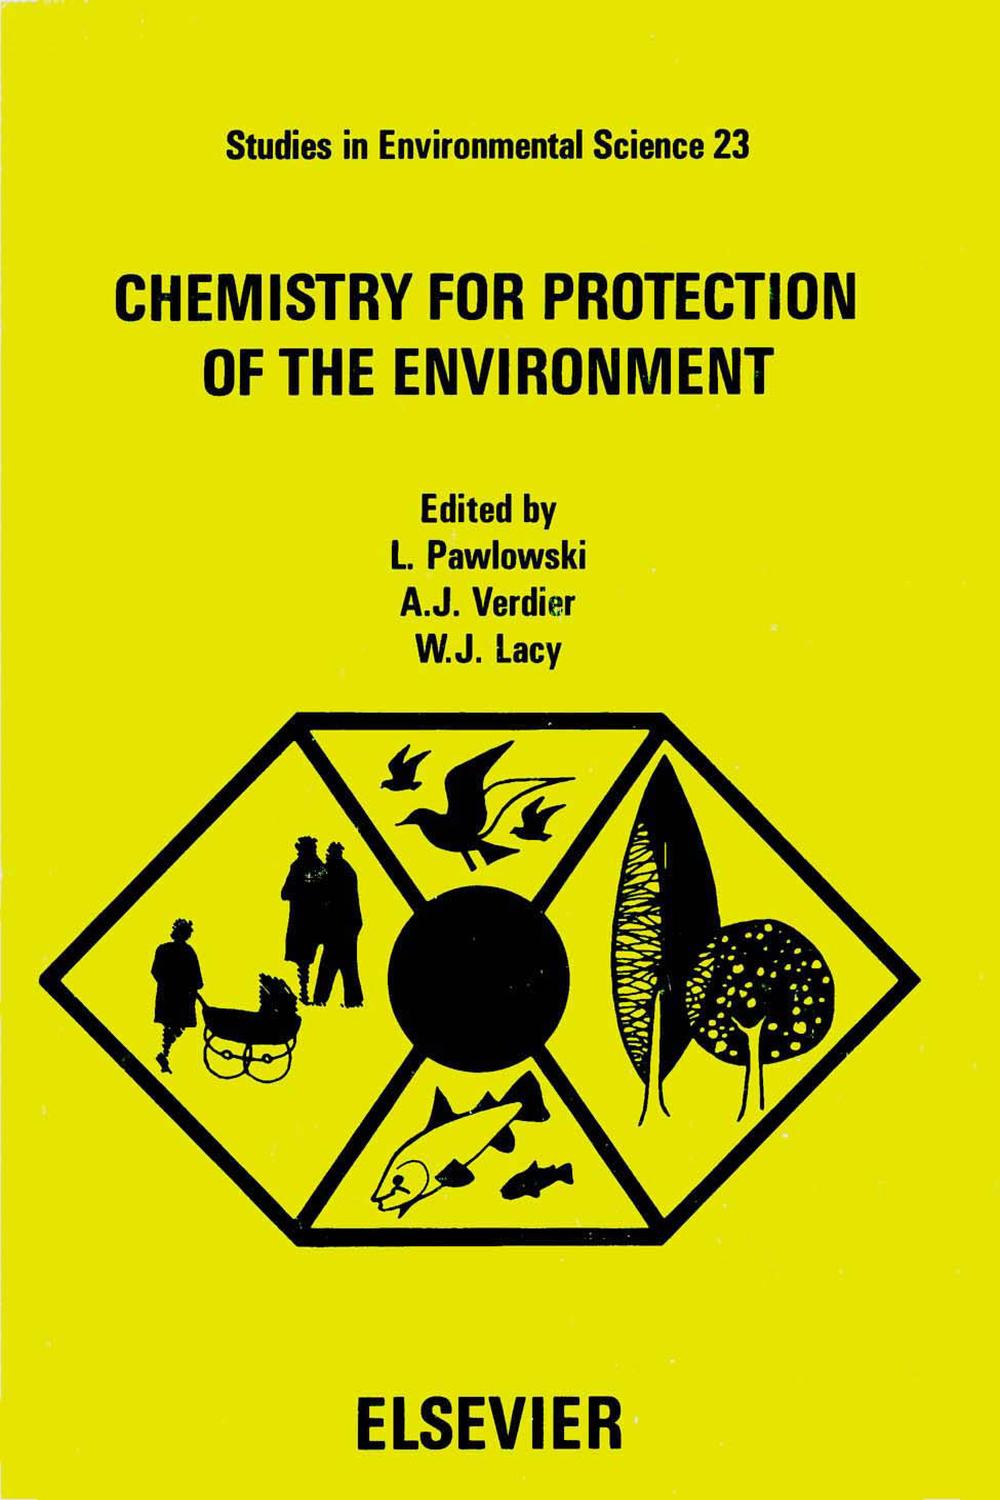 Chemistry for Protection of the Environment - A.J. Verdier, W.J. Lacy, L. Pawlowski